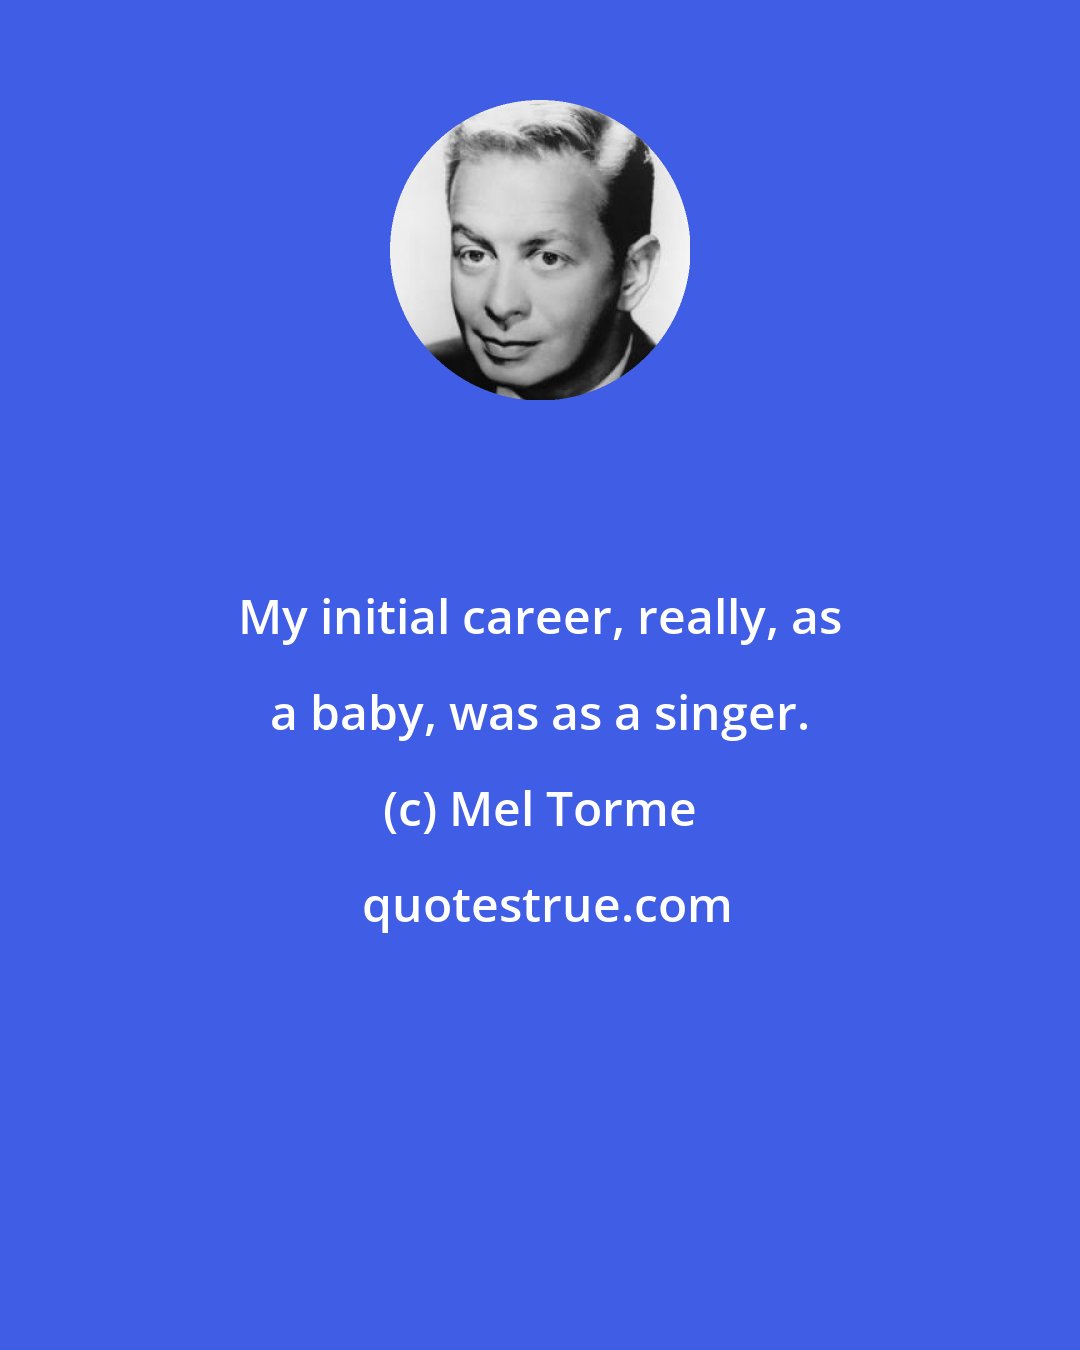 Mel Torme: My initial career, really, as a baby, was as a singer.